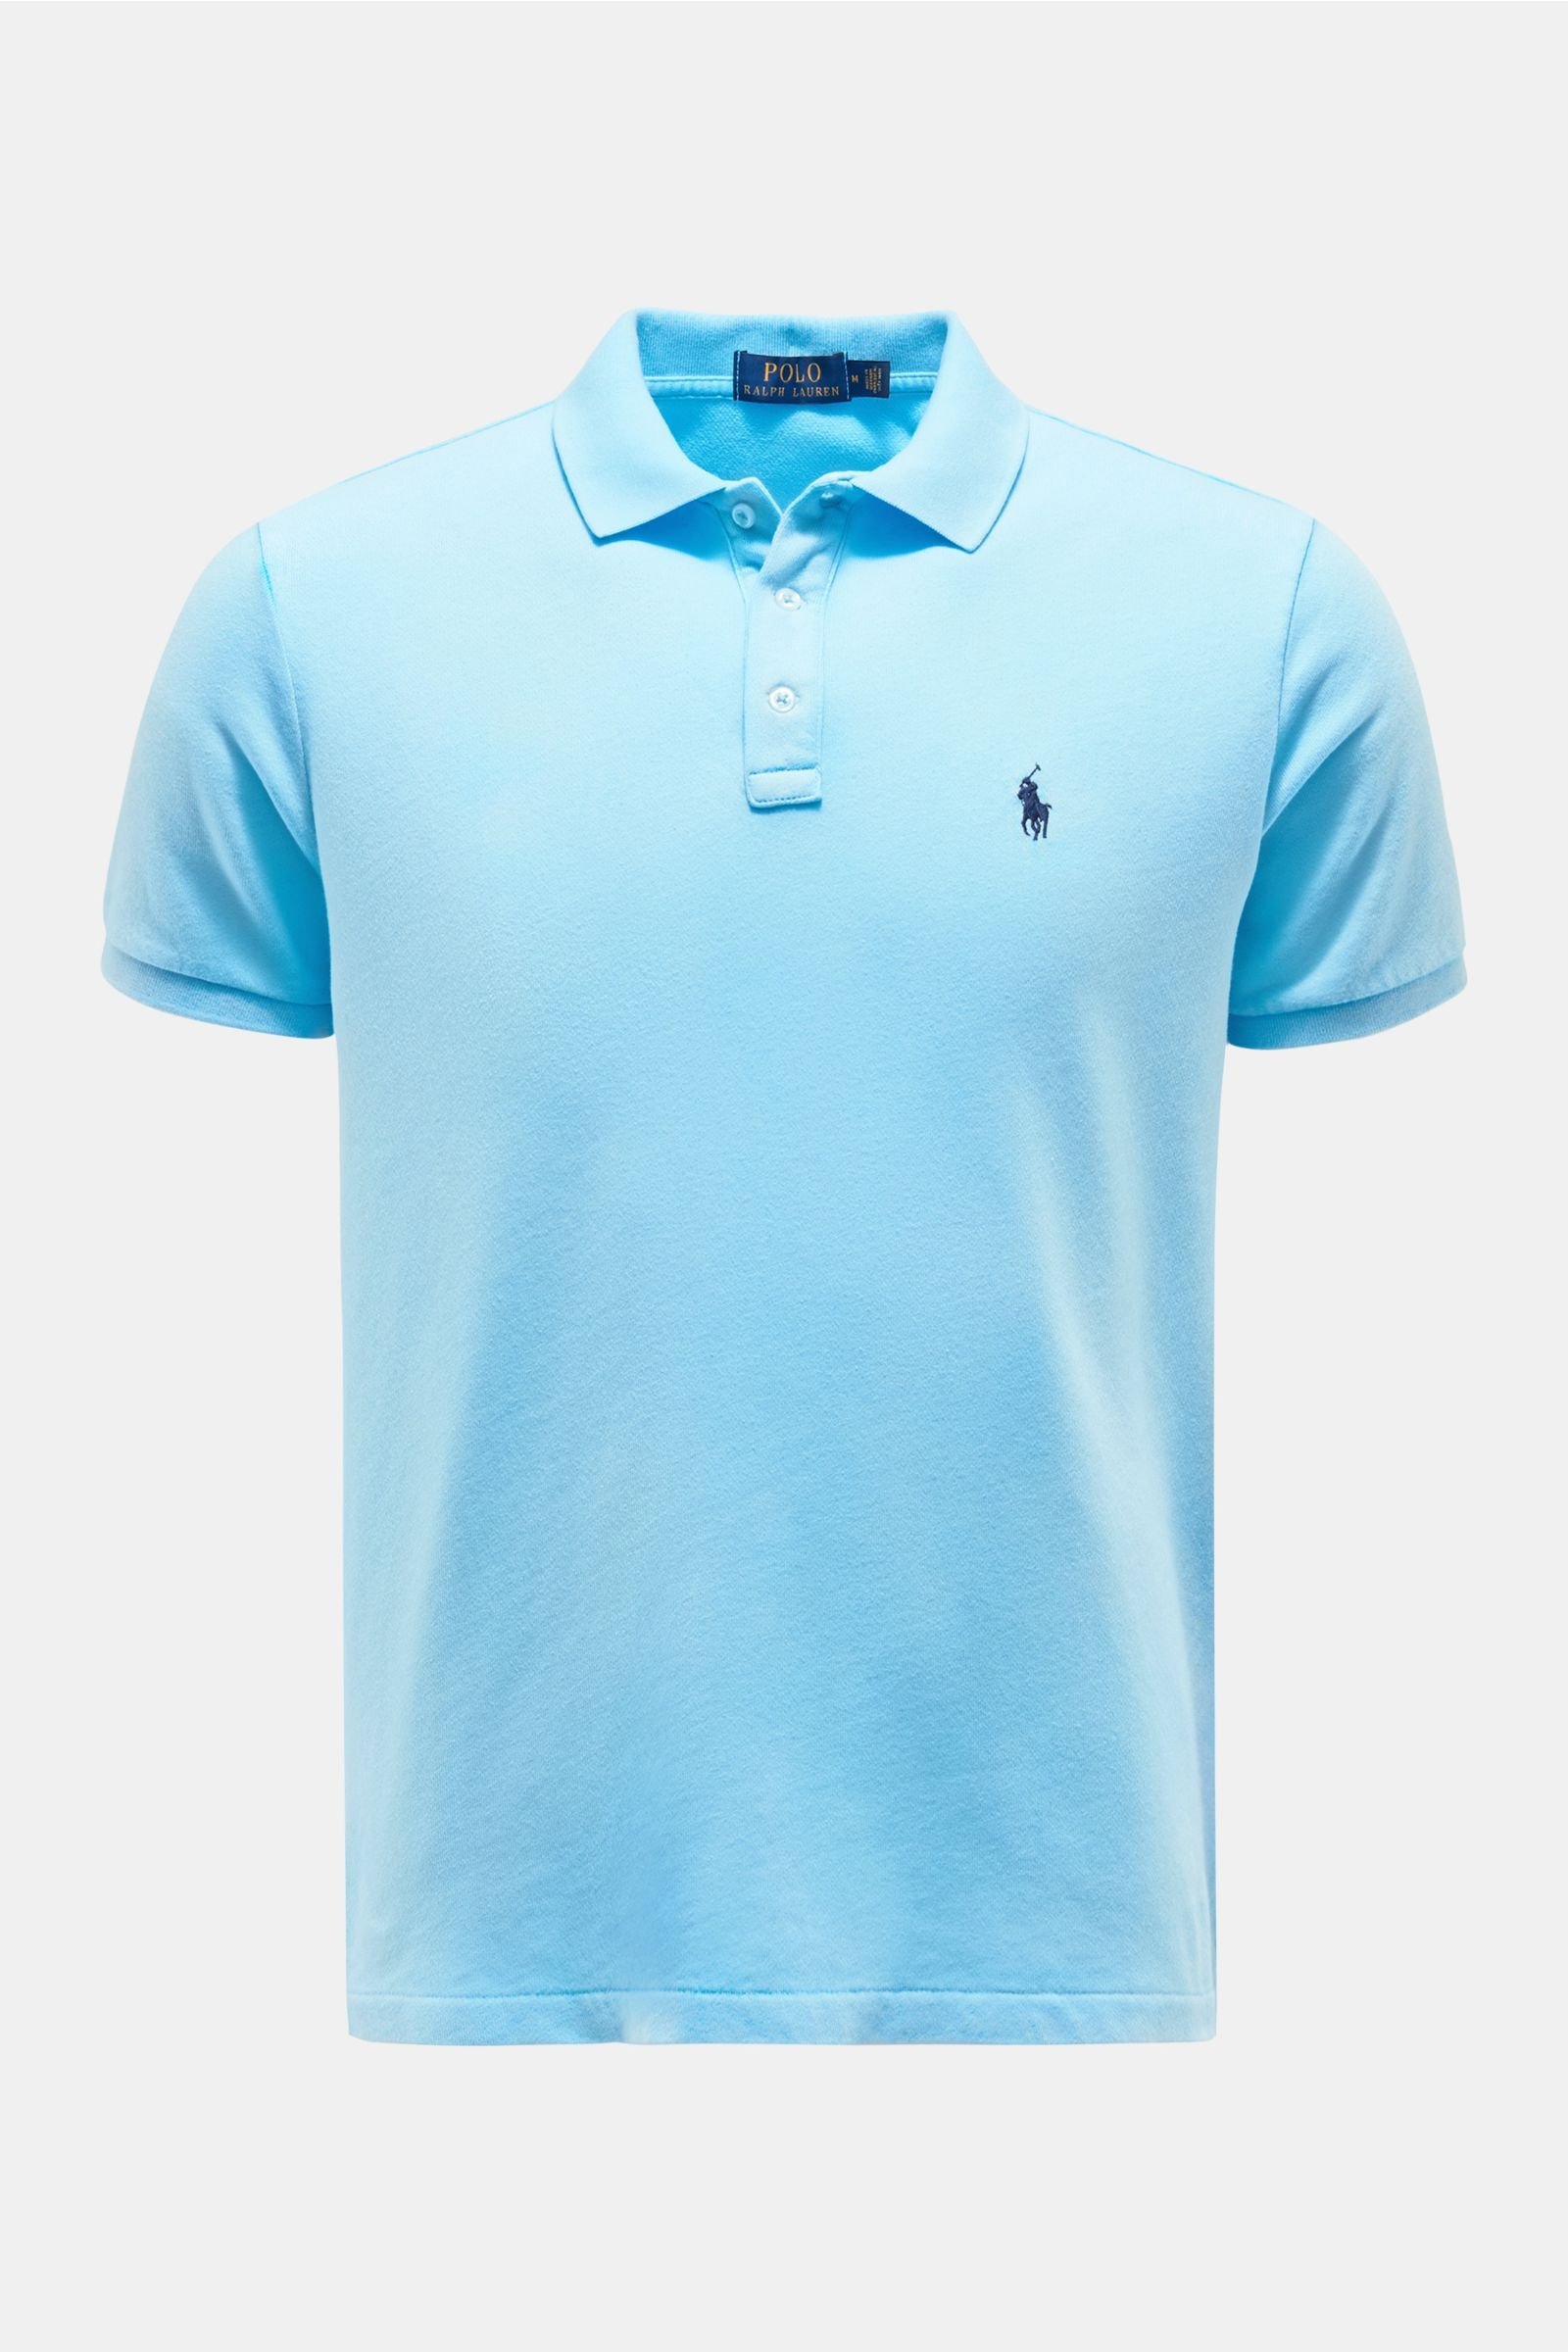 Jersey polo shirt turquoise